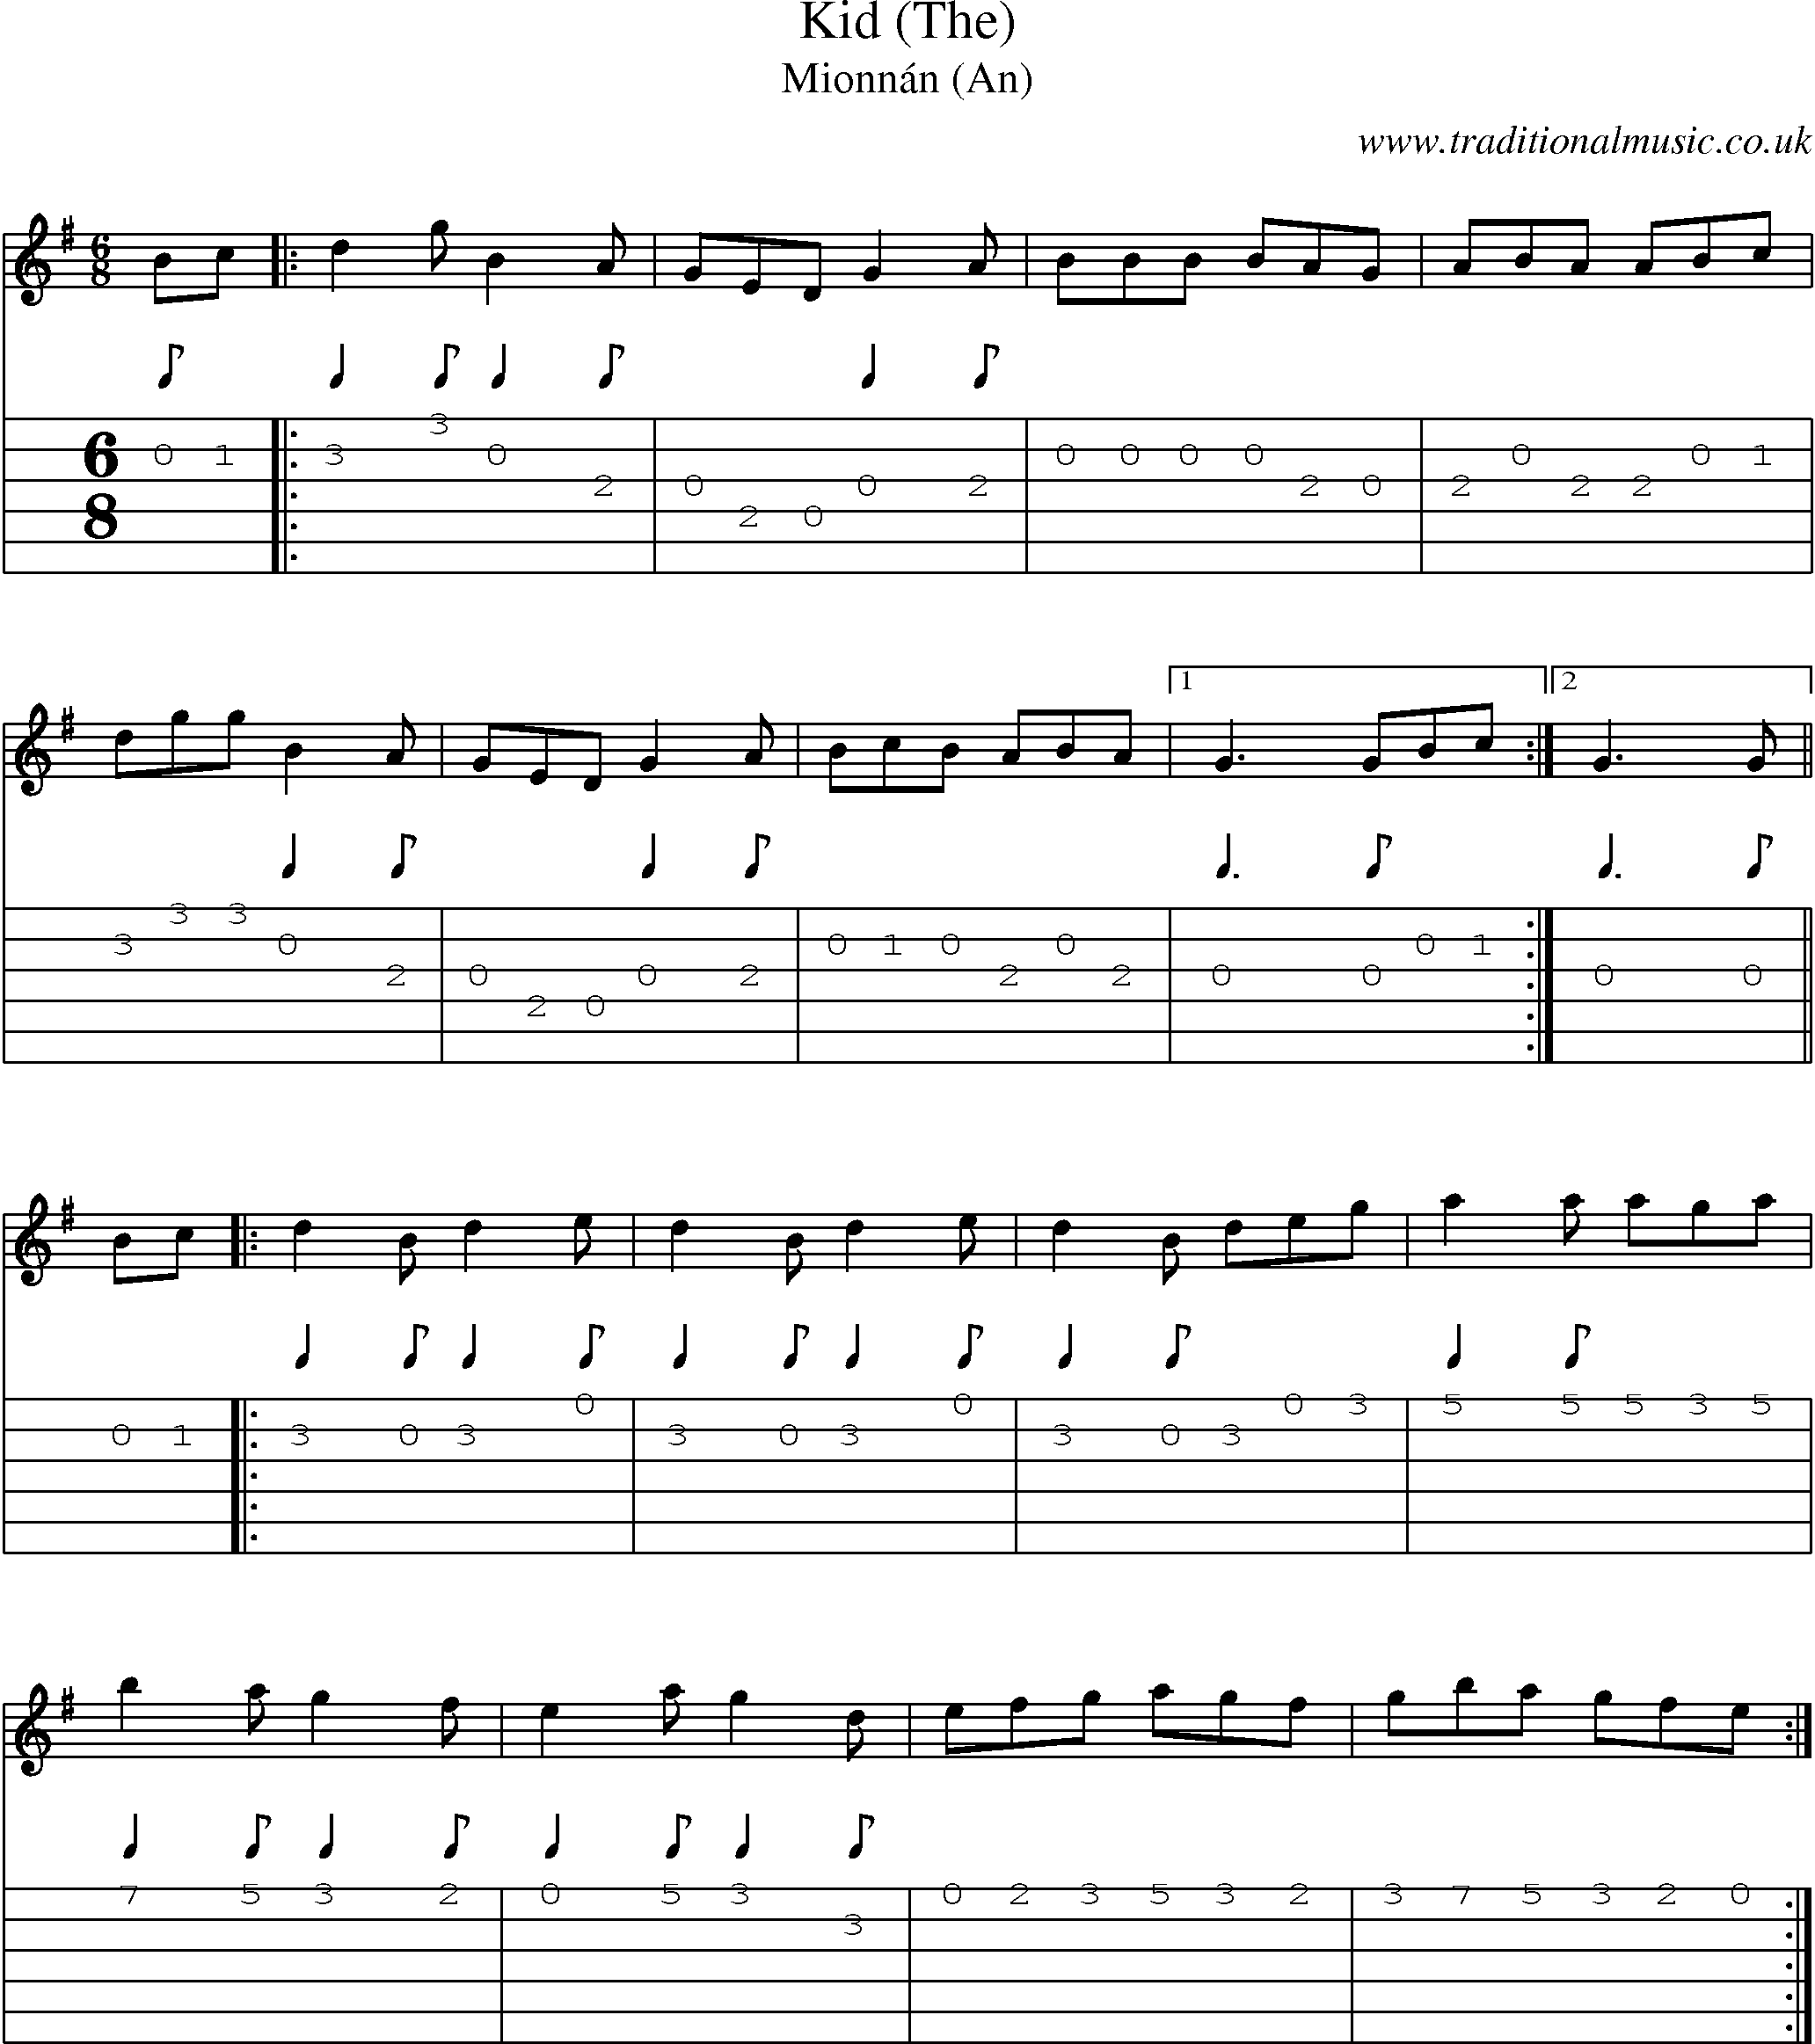 Music Score and Guitar Tabs for Kid (the)